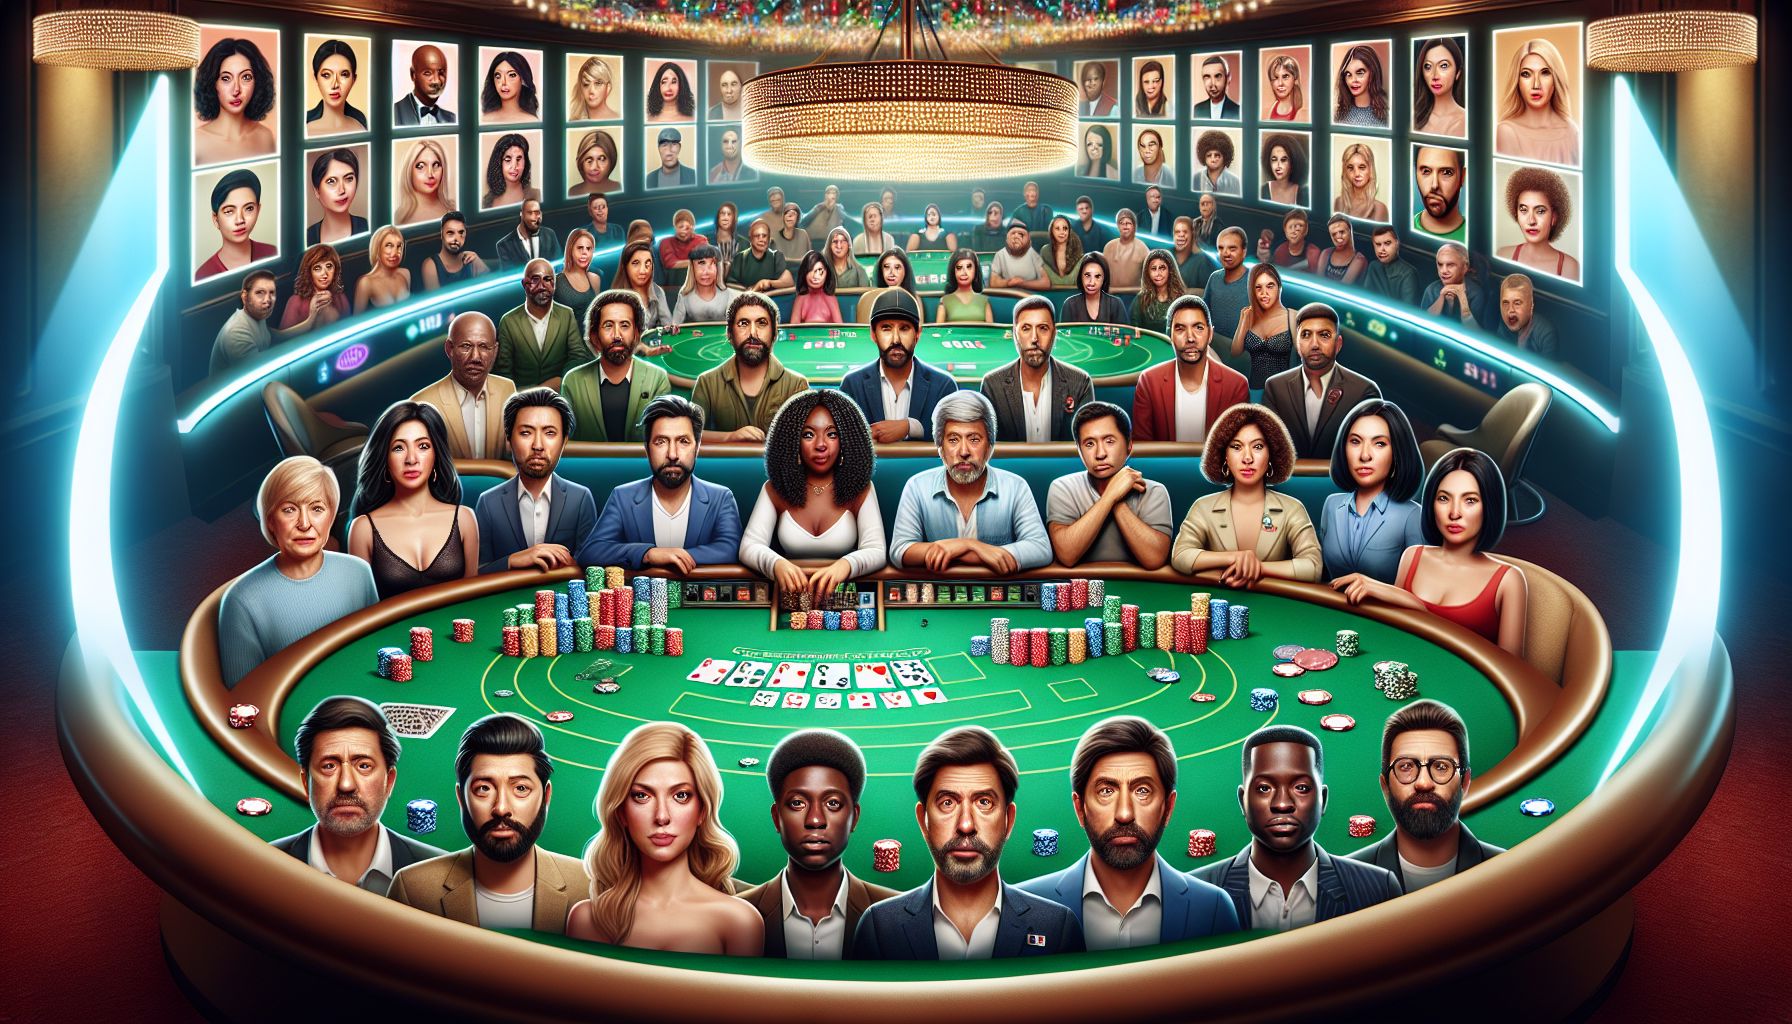 High Rollers: The Life of Elite Casino Poker Players